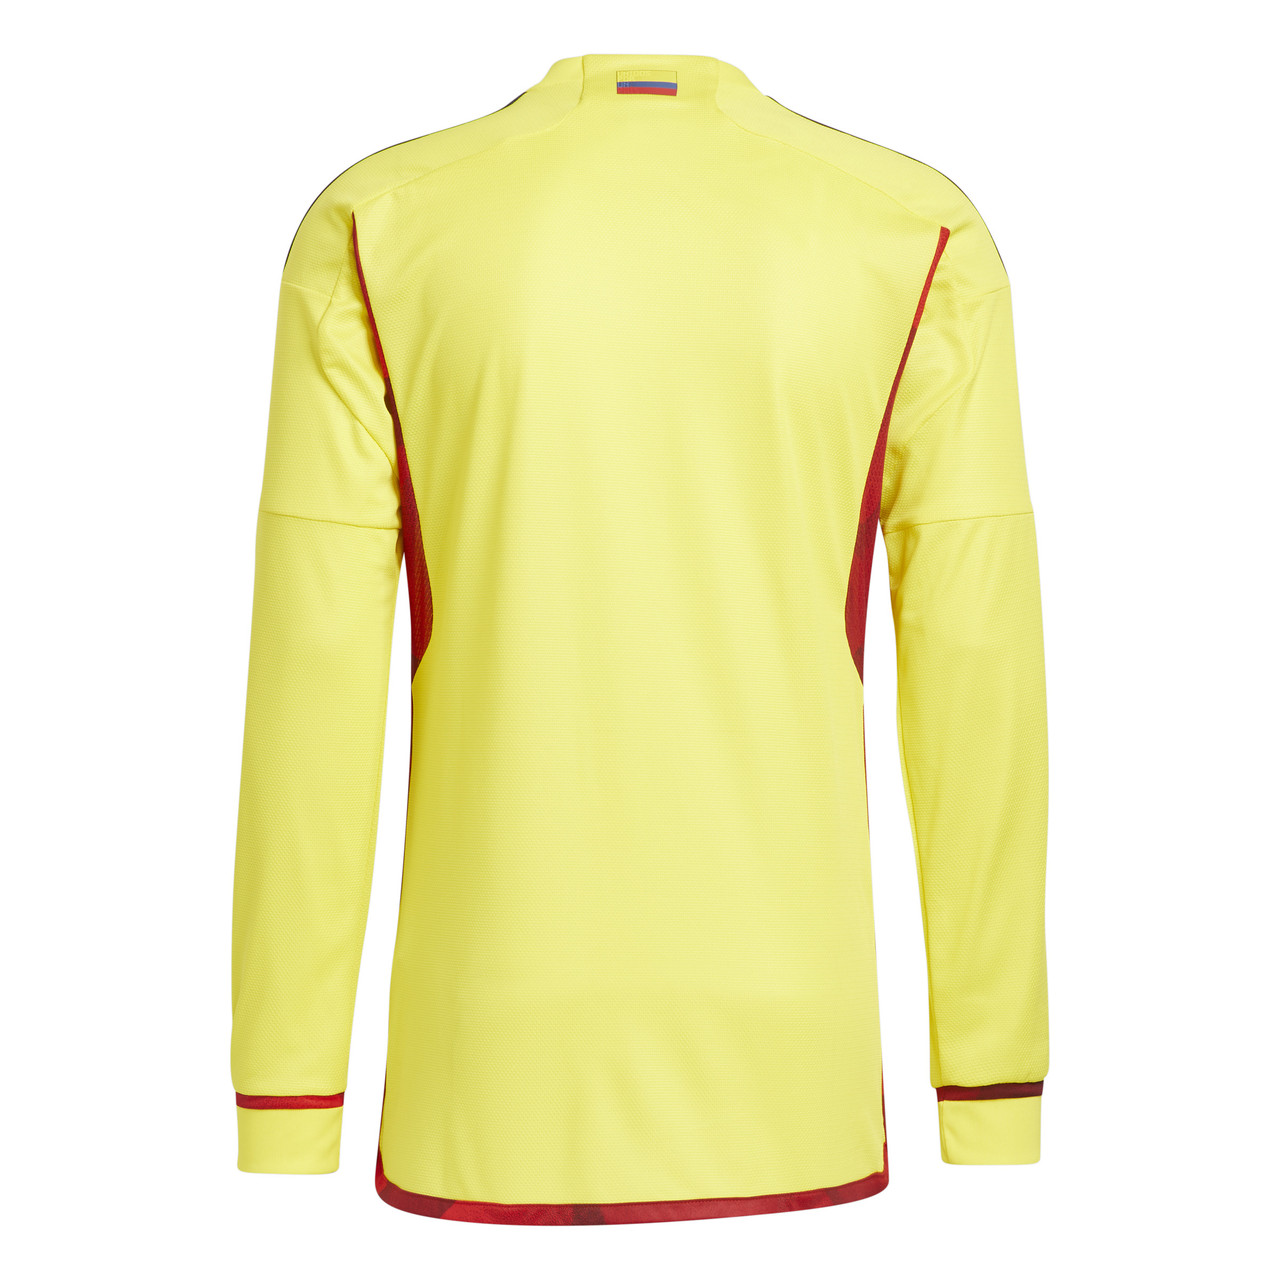 adidas Youth Colombia 2021 Home Soccer Jersey (Medium, Bright Yellow, m)